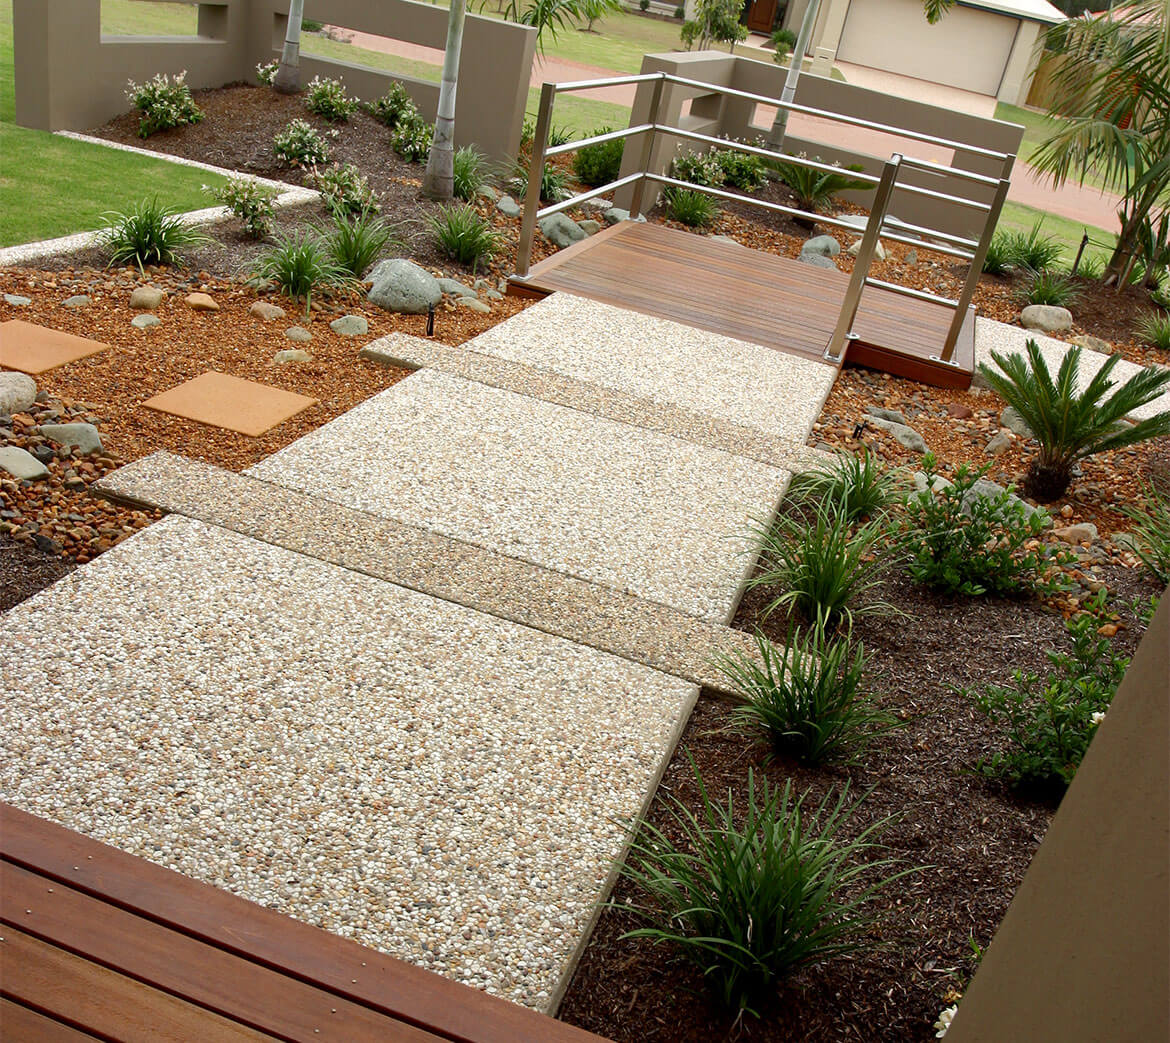 Exposed Pebble concrete footpath using different coloured aggregates